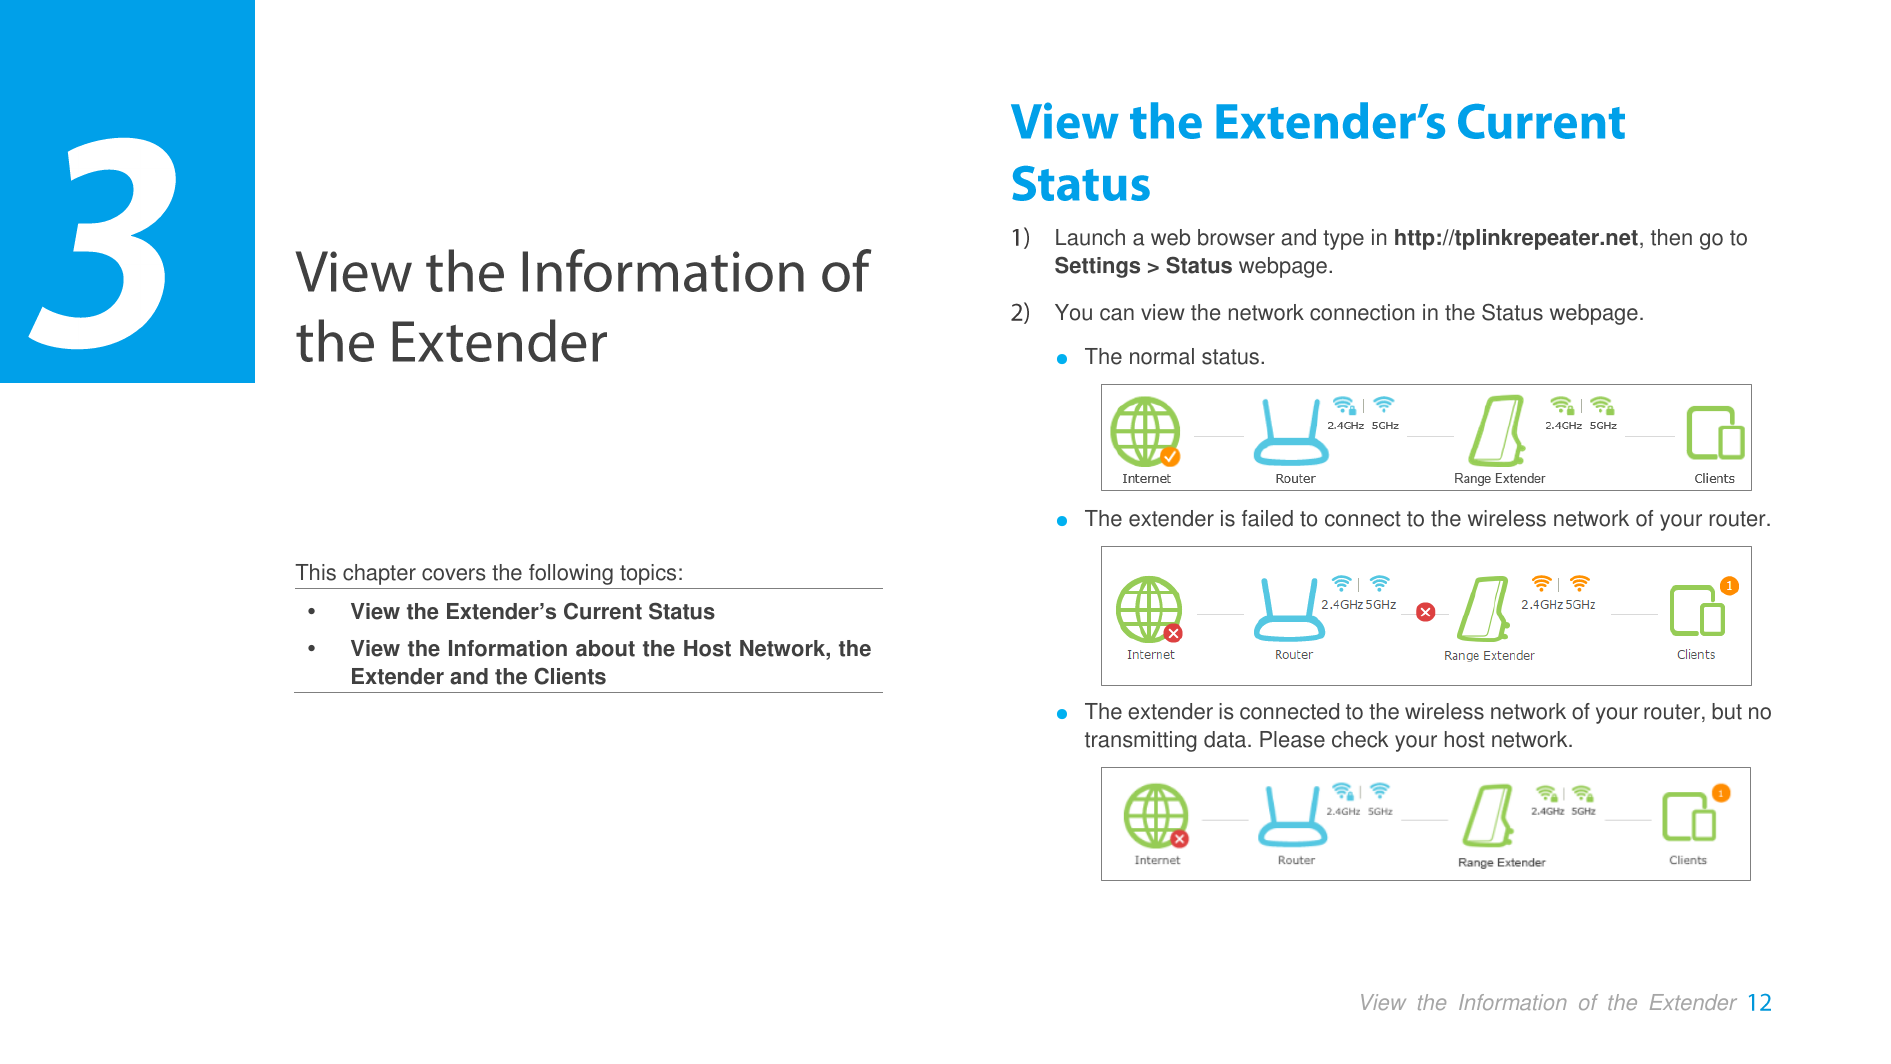  View  the  Information  of  the  Extender      This chapter covers the following topics:  View the Extender’s Current Status  View the Information about the Host Network, the Extender and the Clients  Launch a web browser and type in http://tplinkrepeater.net, then go to Settings &gt; Status webpage.  You can view the network connection in the Status webpage. ● The normal status.  ● The extender is failed to connect to the wireless network of your router.  ● The extender is connected to the wireless network of your router, but no transmitting data. Please check your host network.      3 